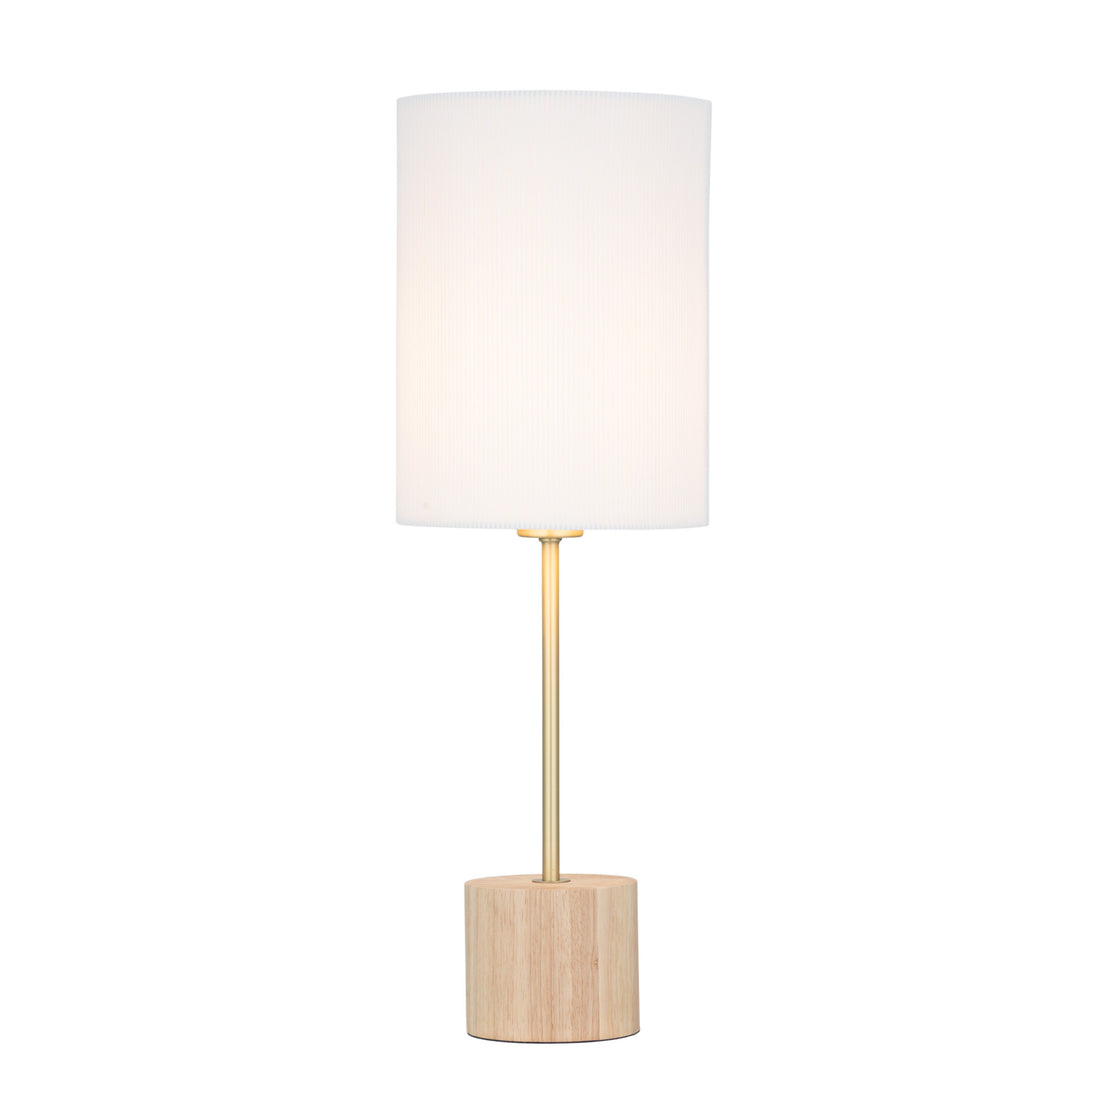 Flemington Timber and White Modern Table Lamp